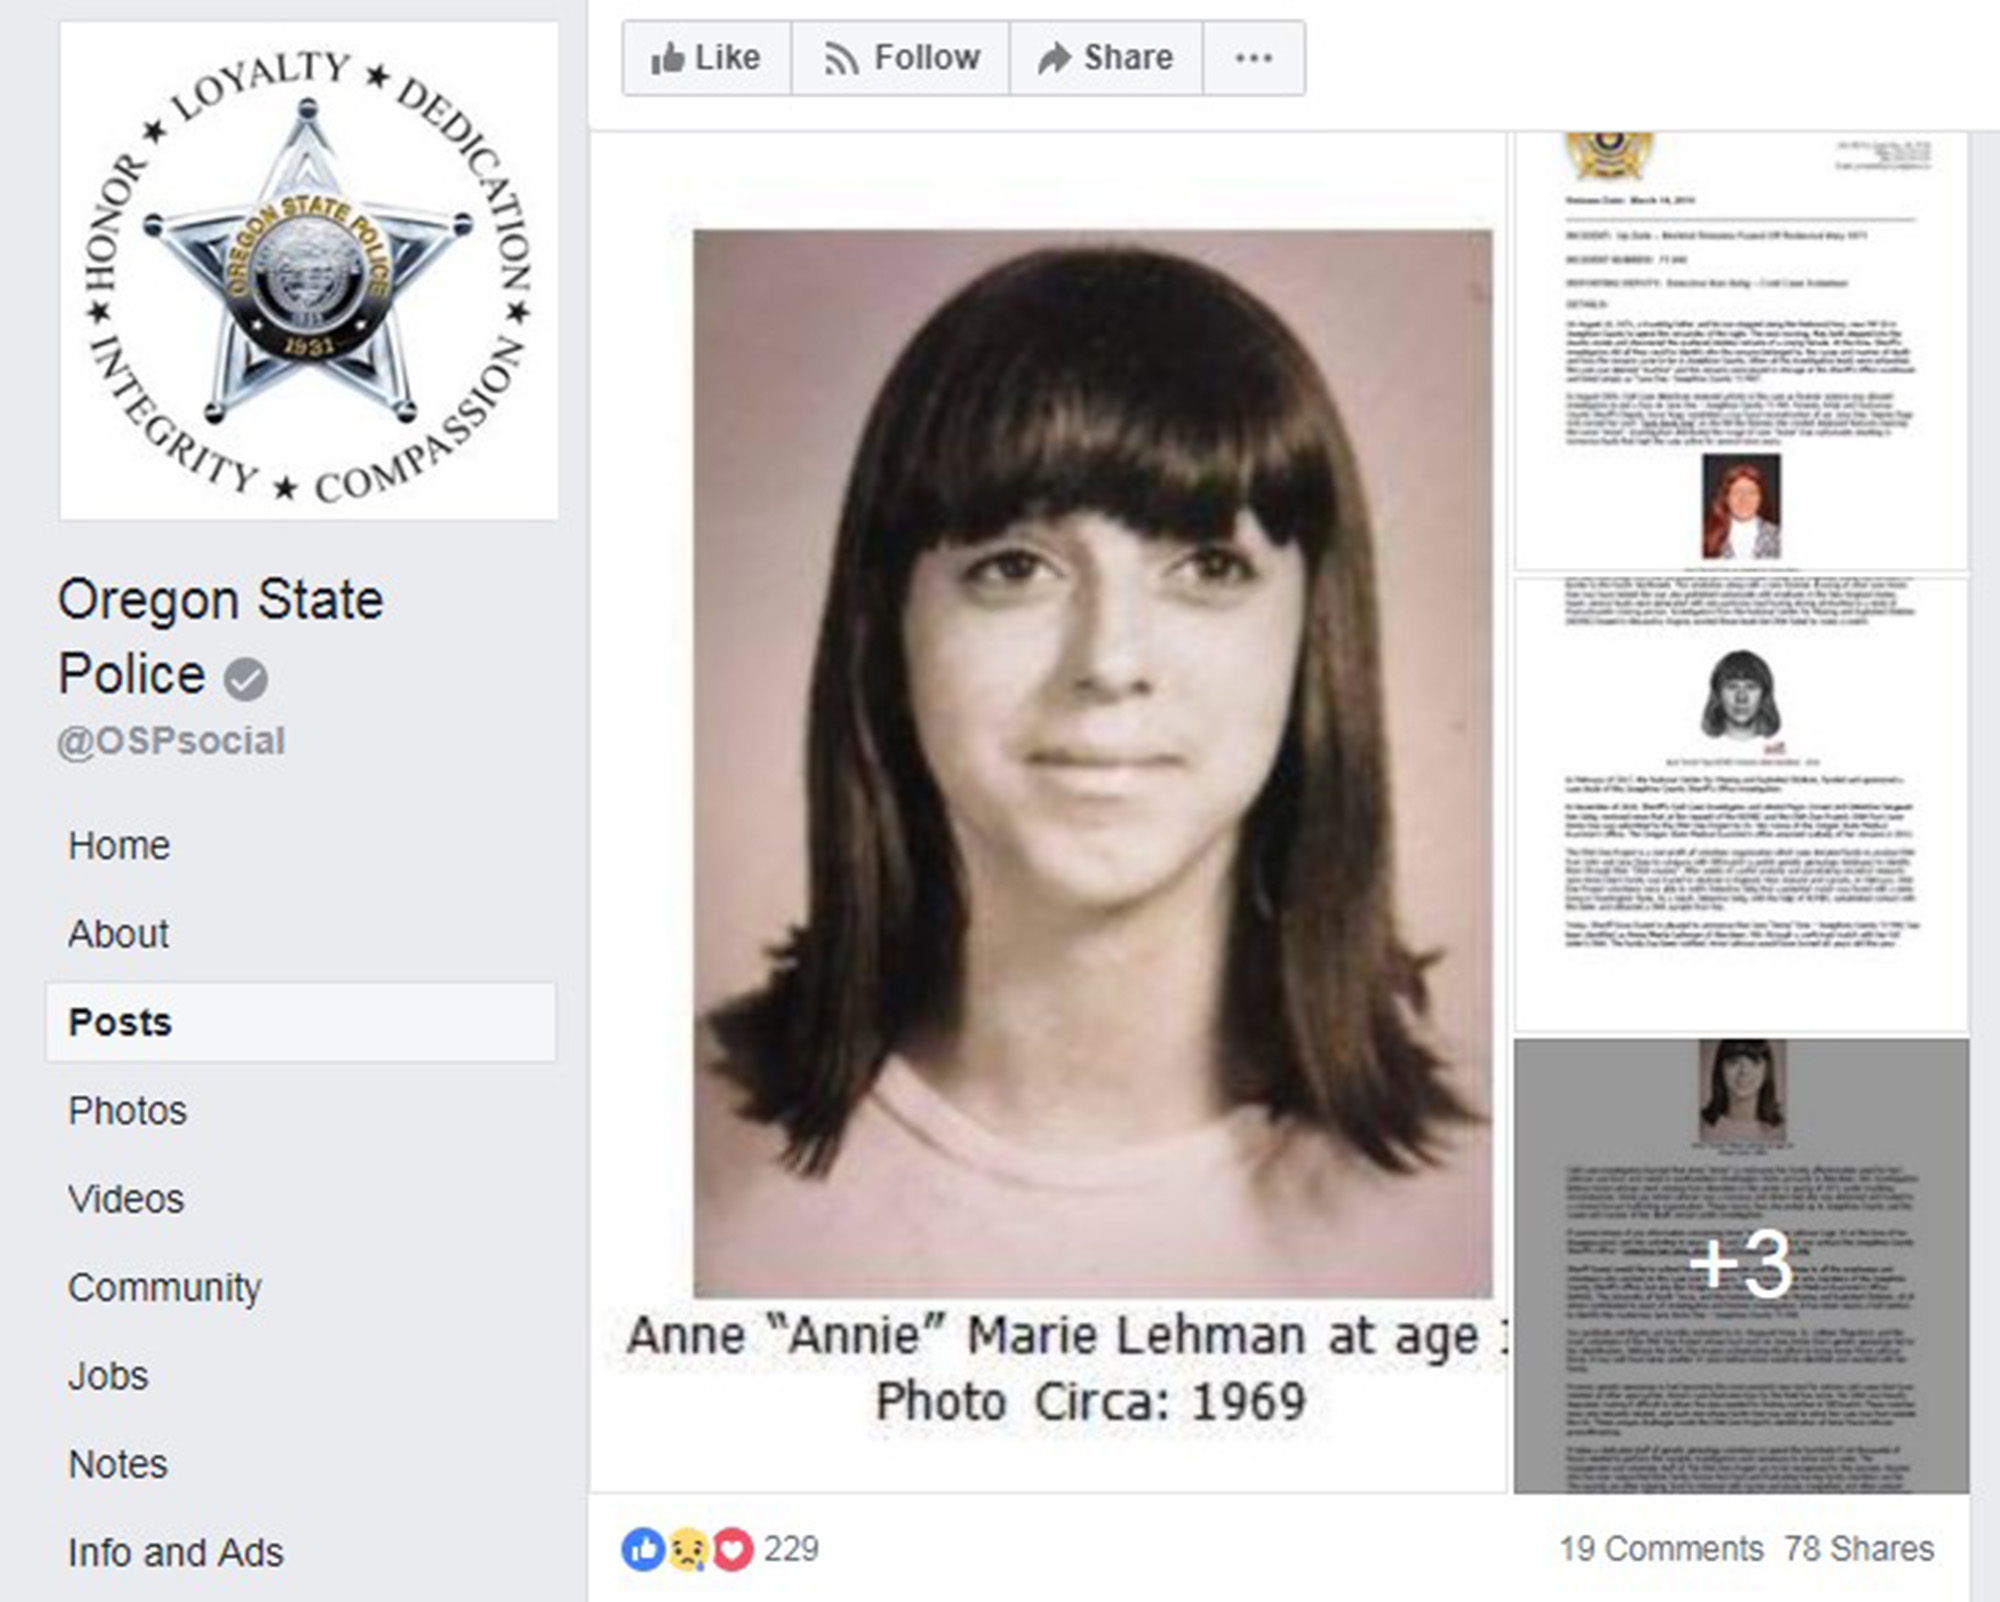 PHOTO: Oregon State Police released this image with a press statement that skeletal remains found in 1971 have been positively identified as Anne Marie Lehman.